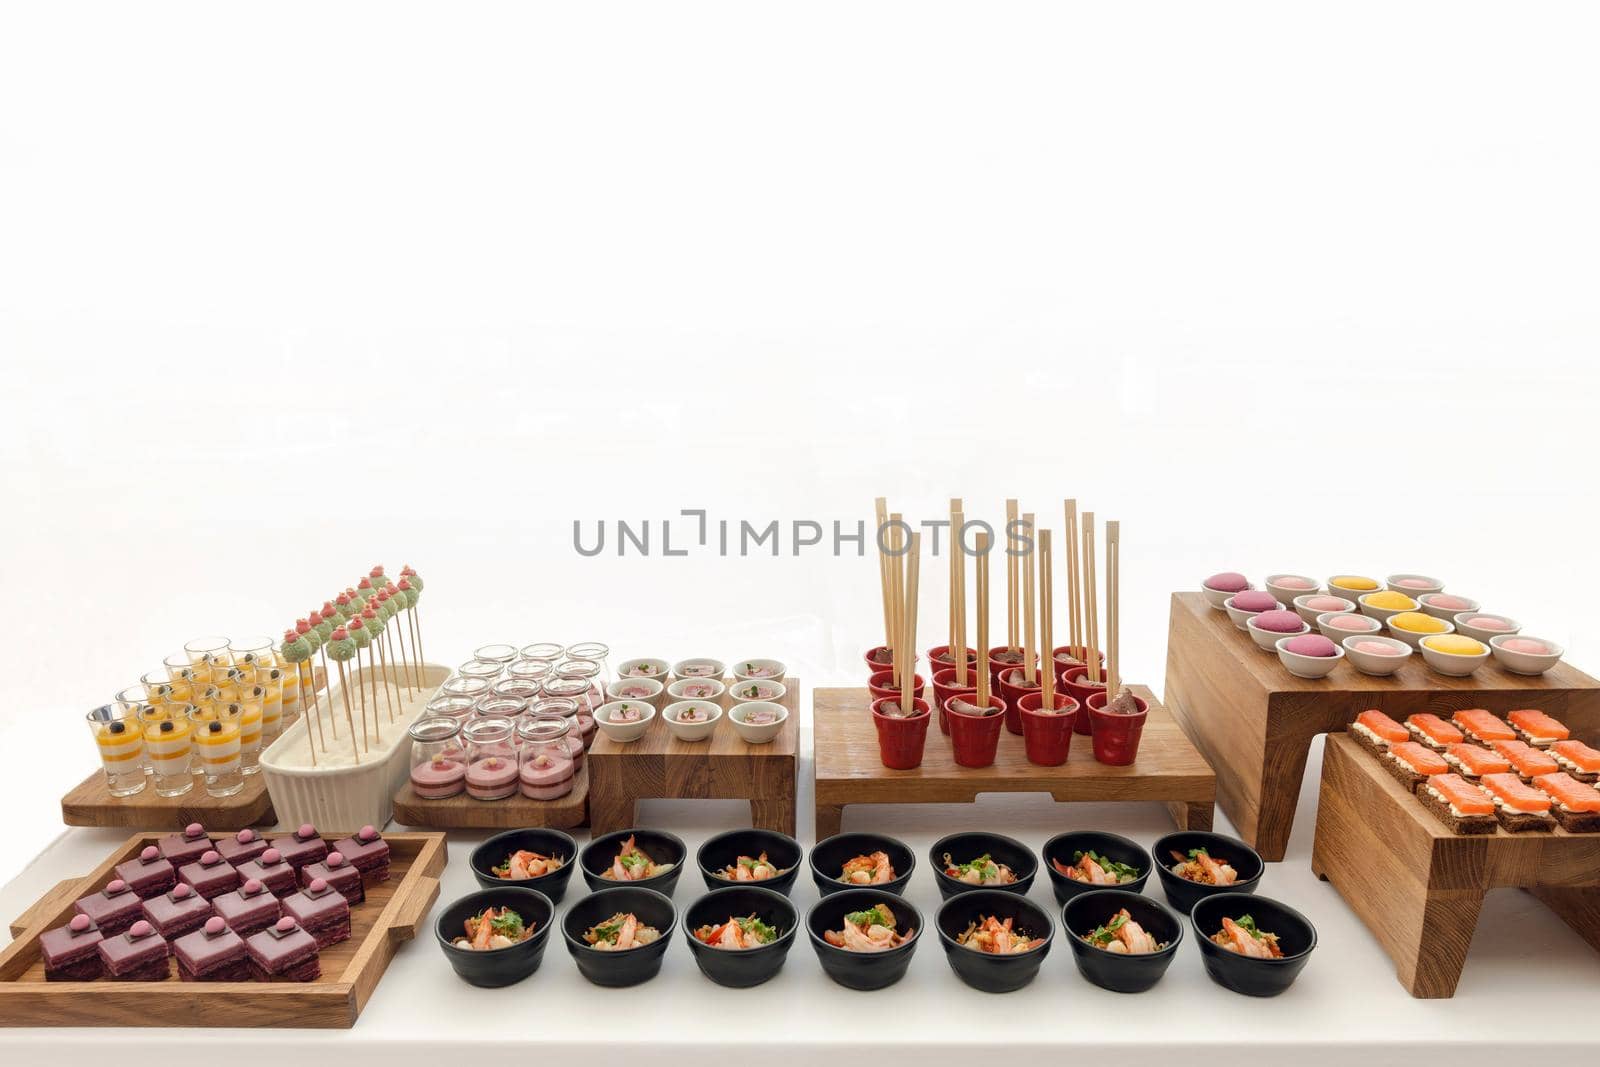 Assorted delicious sweets and pastry served on wooden trays at restaurant buffet isolated on white background